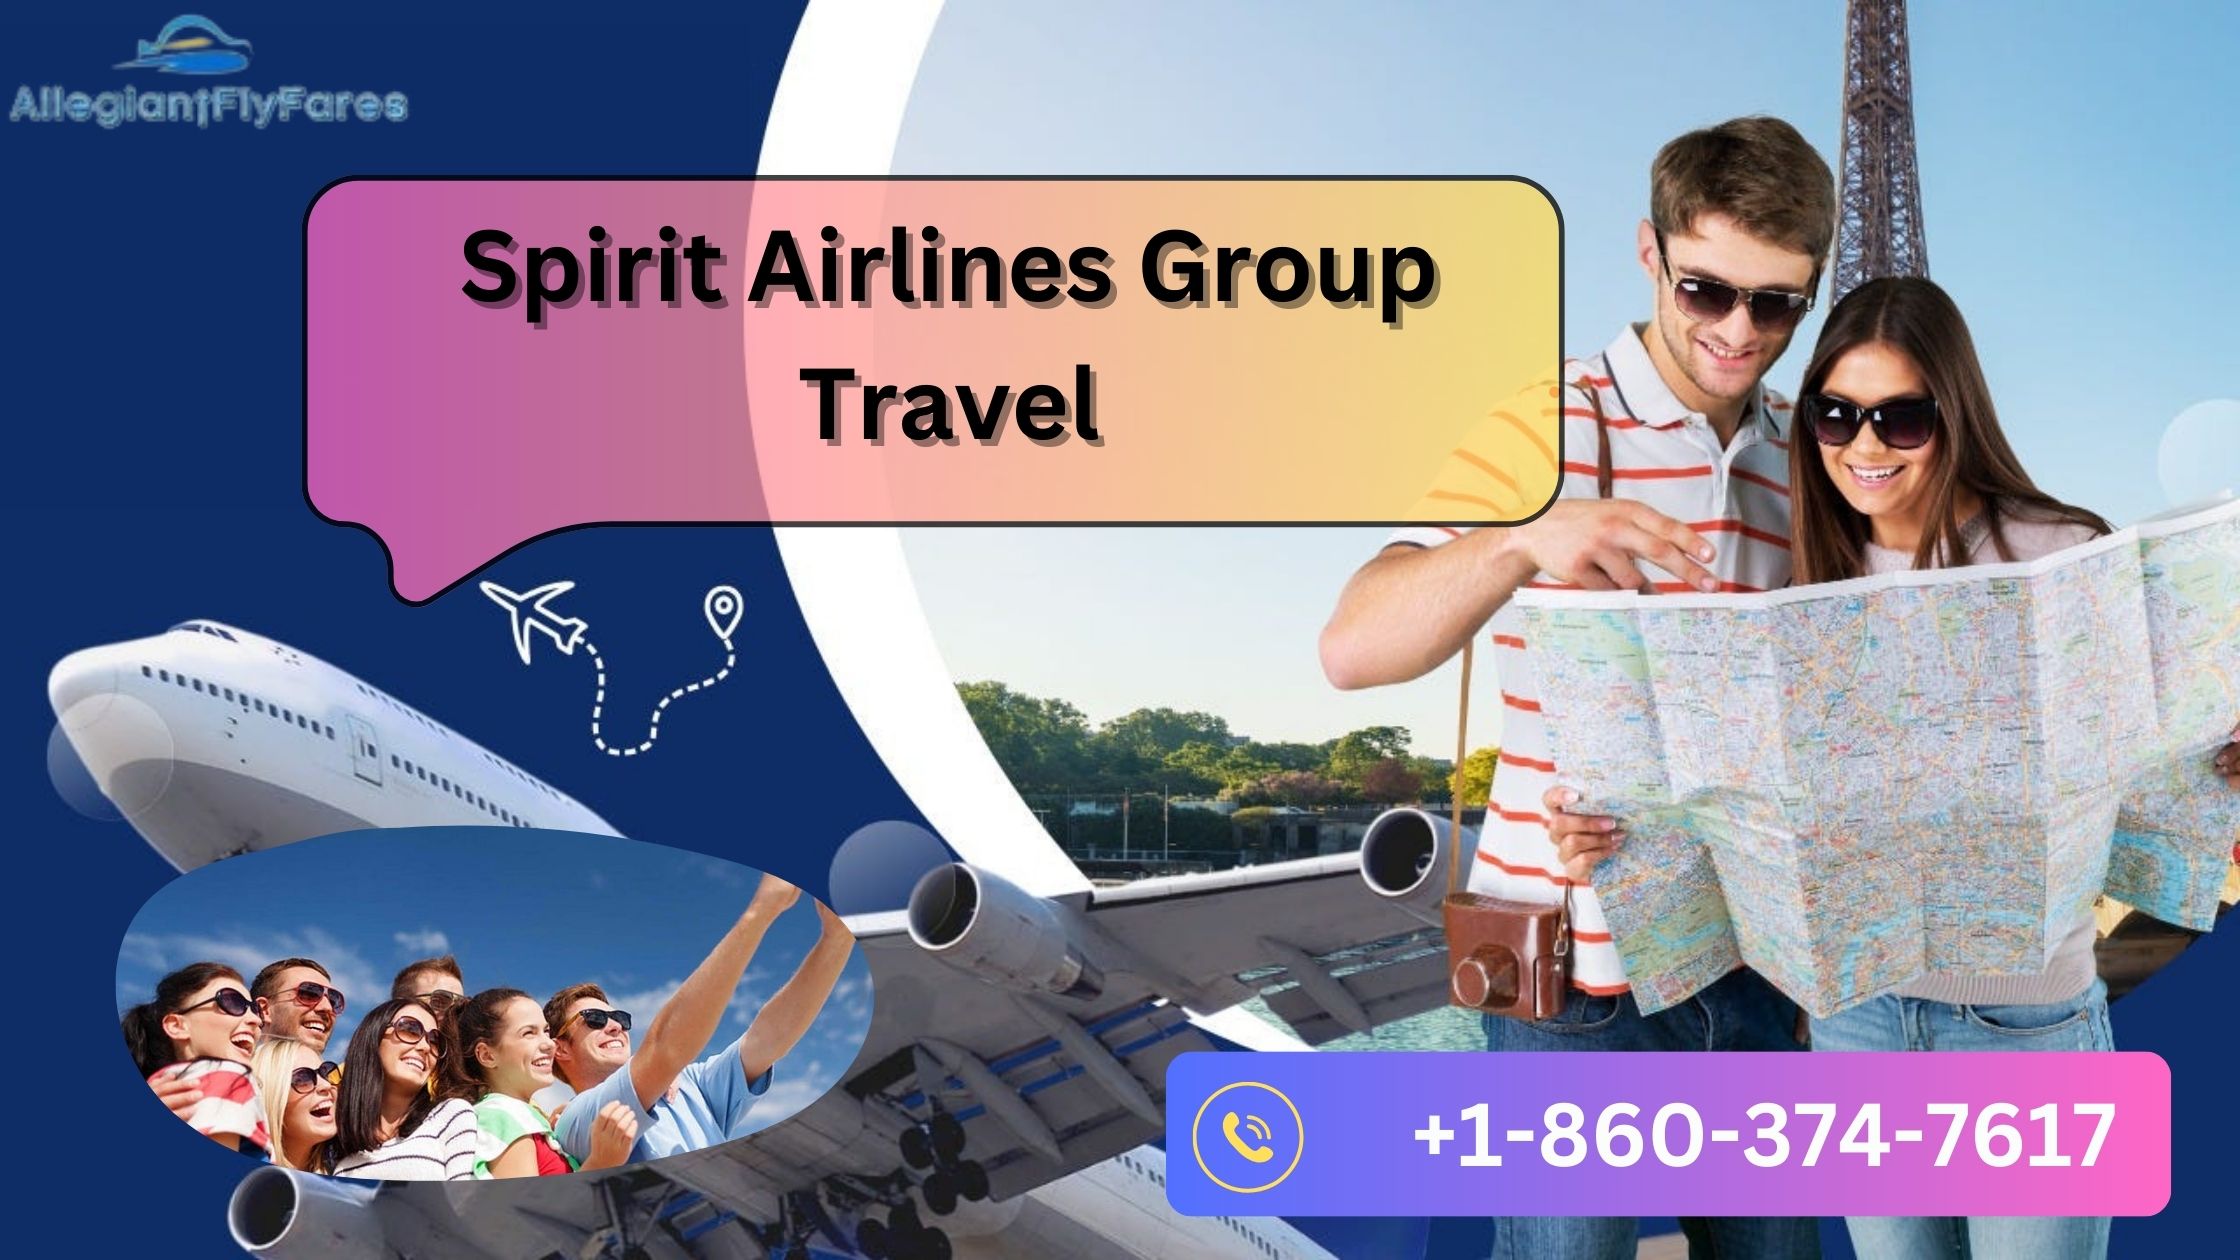 How Can I Make A Group Booking With Spirit Airlines?